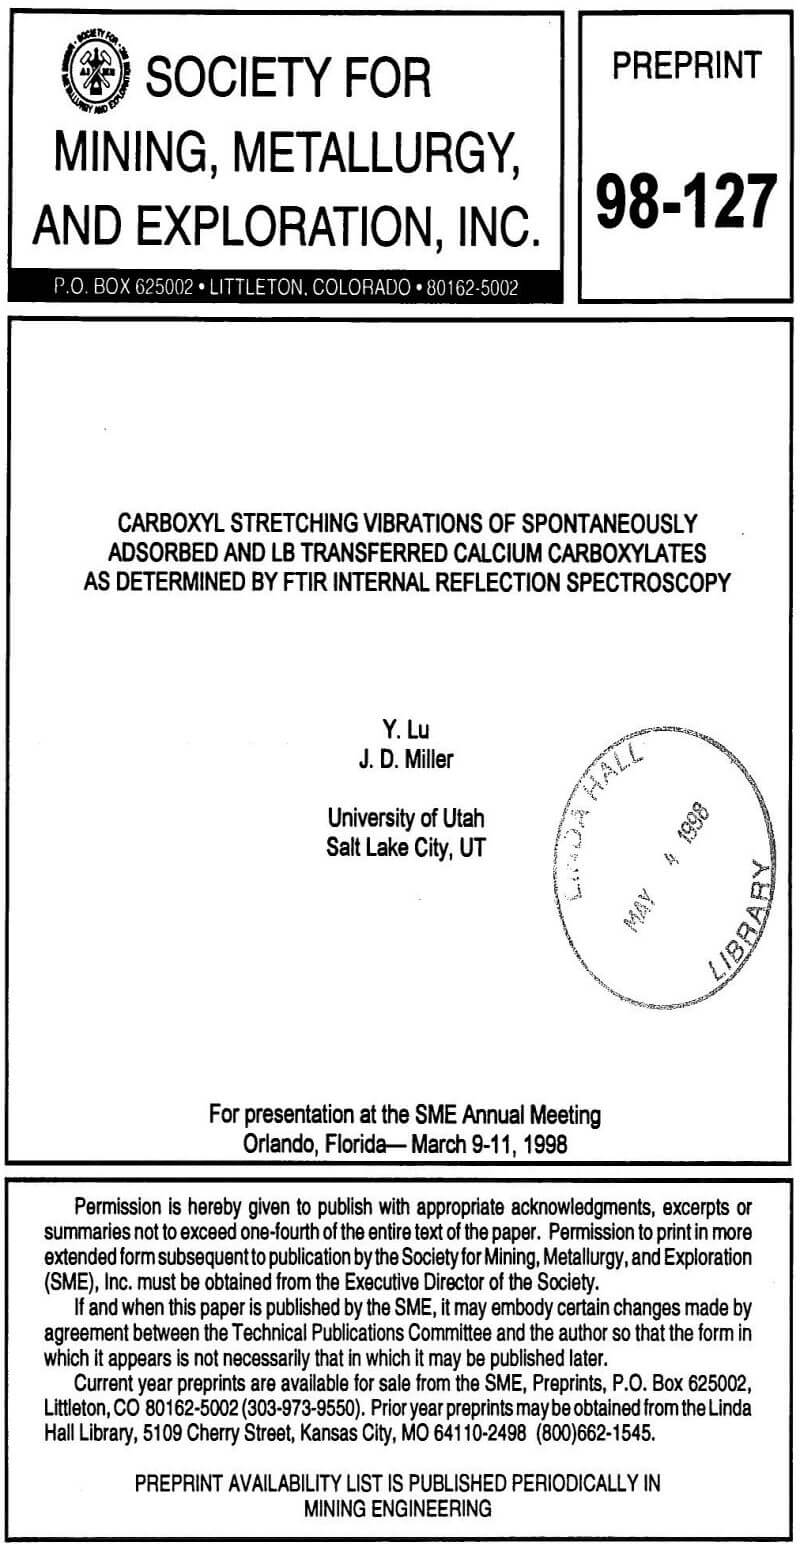 carboxyl stretching vibrations of spontaneously adsorbed and lb transferred calcium carboxylates as determined by ftir internal reflection spectroscopy